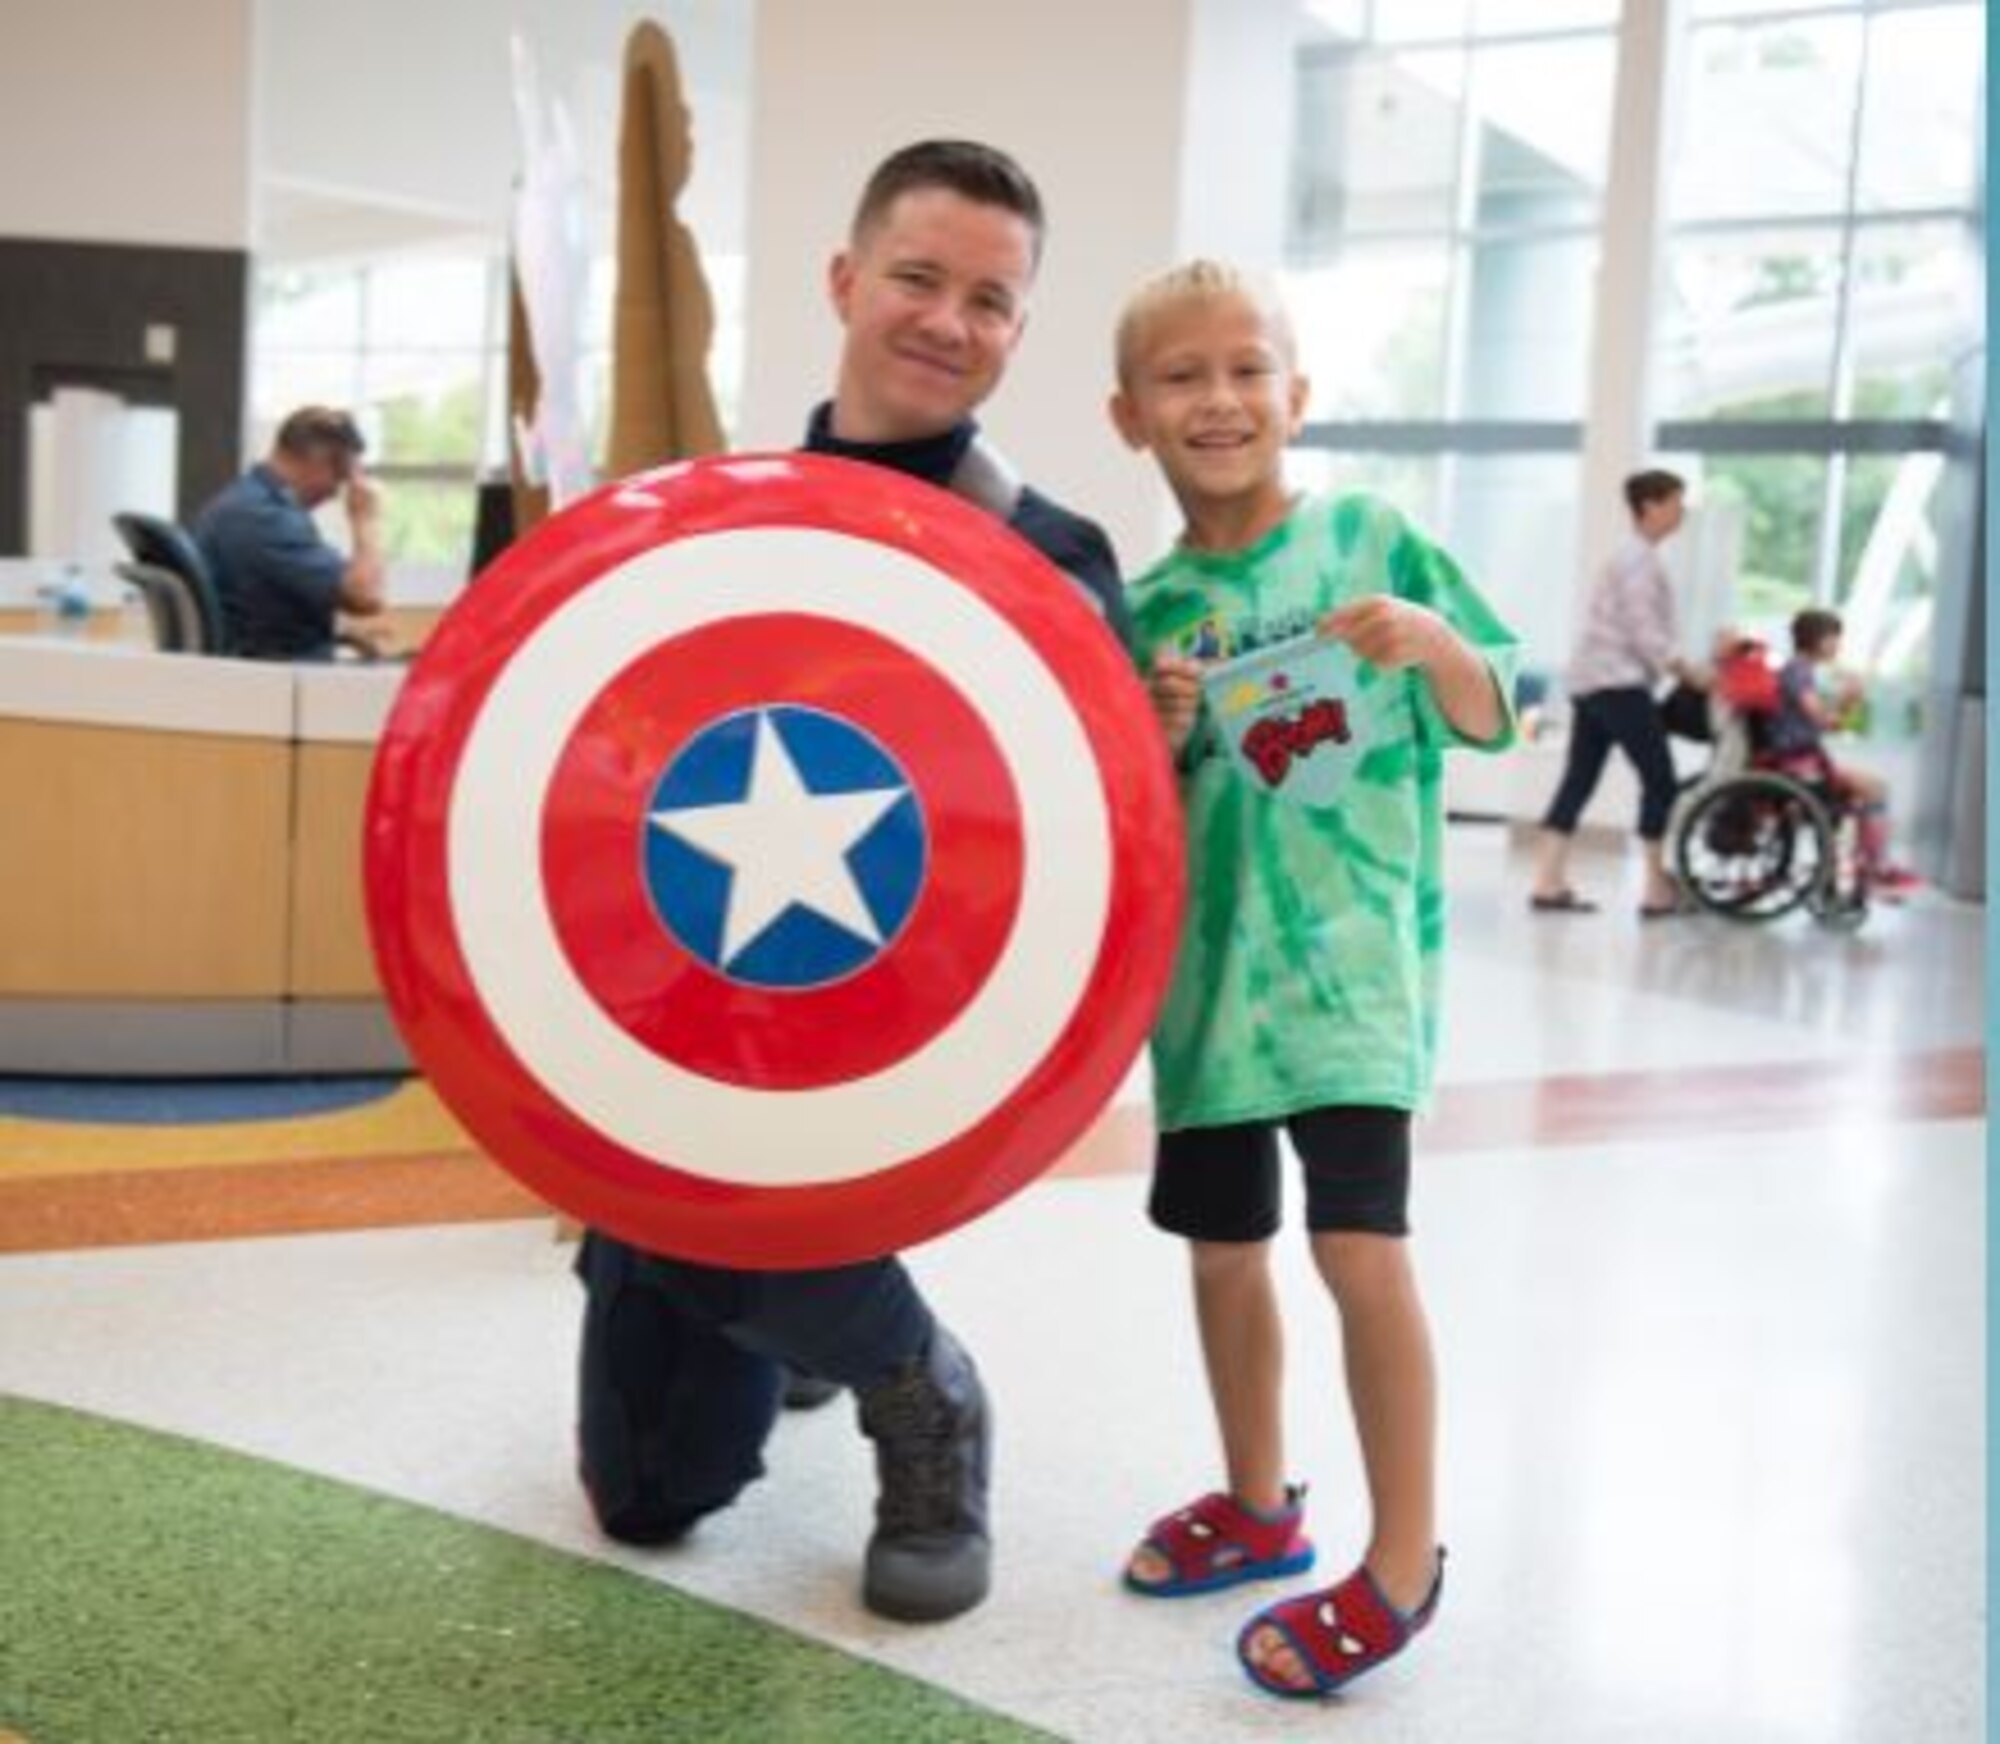 U.S. Air Force Tech. Sgt. Christopher Long, 87th Force Support Squadron base honor guard NCO in charge, volunteers to dress up as Captain America to give back to children and make them smile. (Courtesy photo)